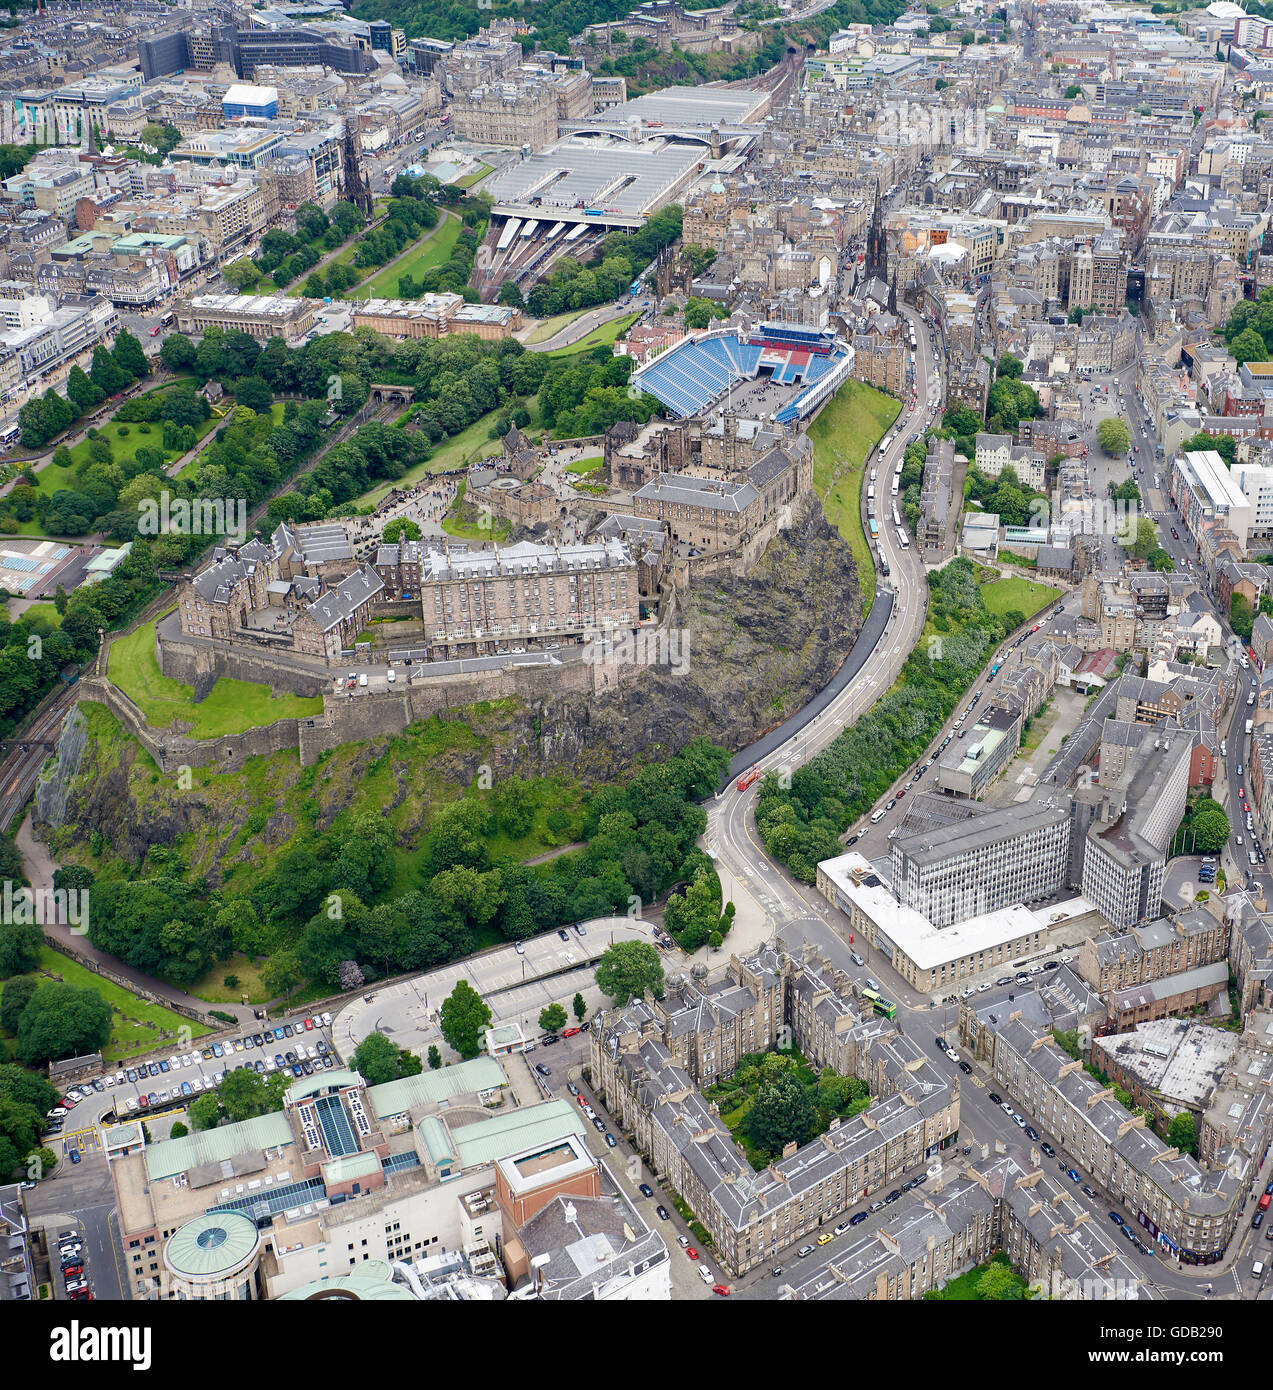 Edinburgh Castle & City Centre from the air, looking over the Old Town and Grass Market, Central Scotland, UK Stock Photo